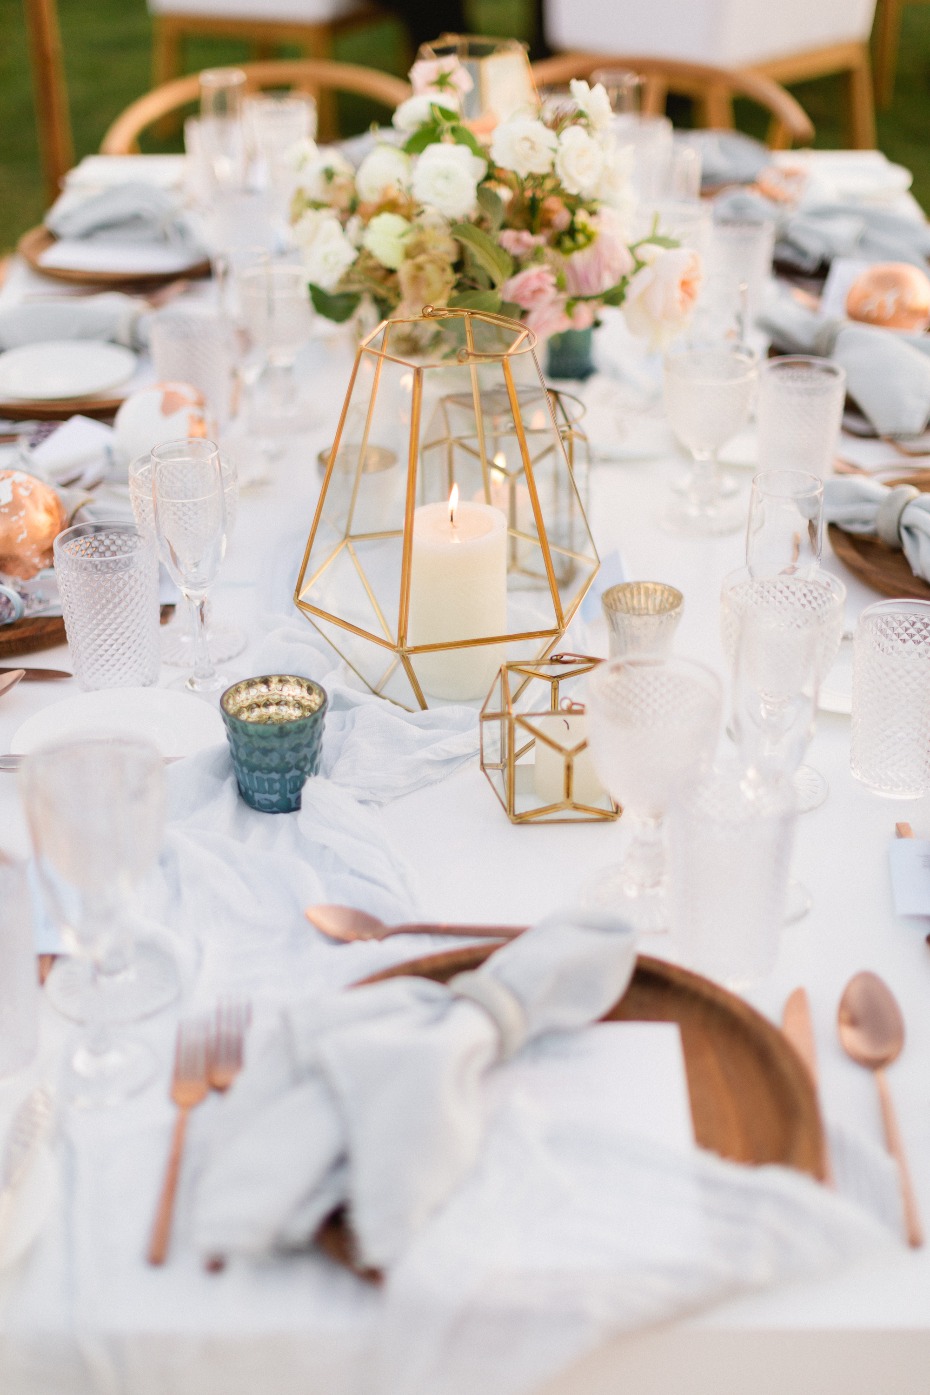 Chic table decor with gold glass lanterns